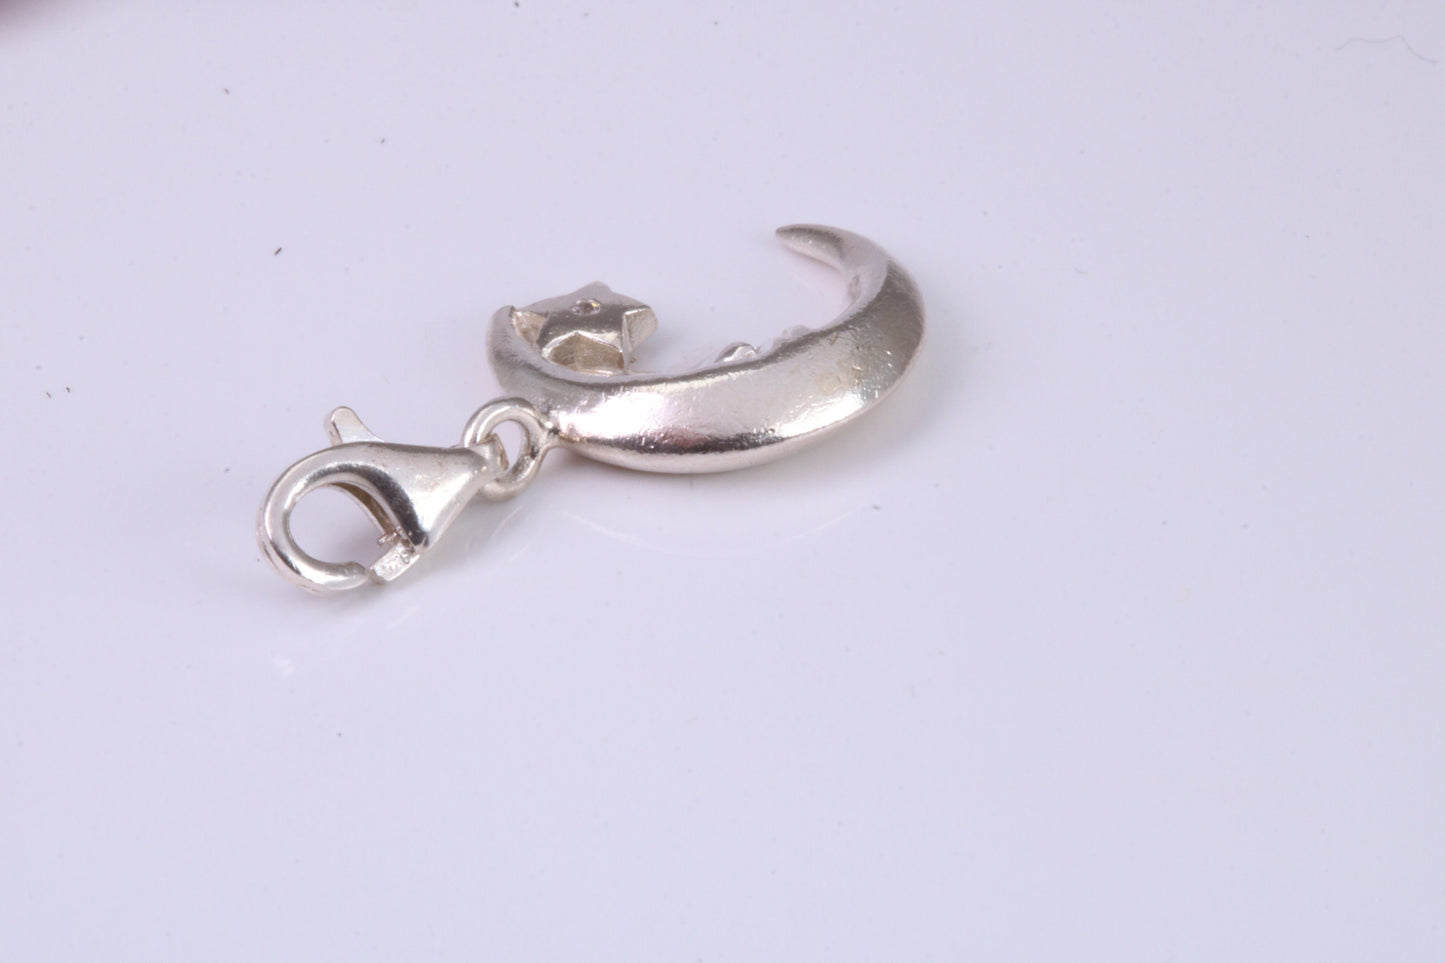 Moon and Star Charm, Traditional Charm, Made from Solid 925 Grade Sterling Silver, Complete with Attachment Link